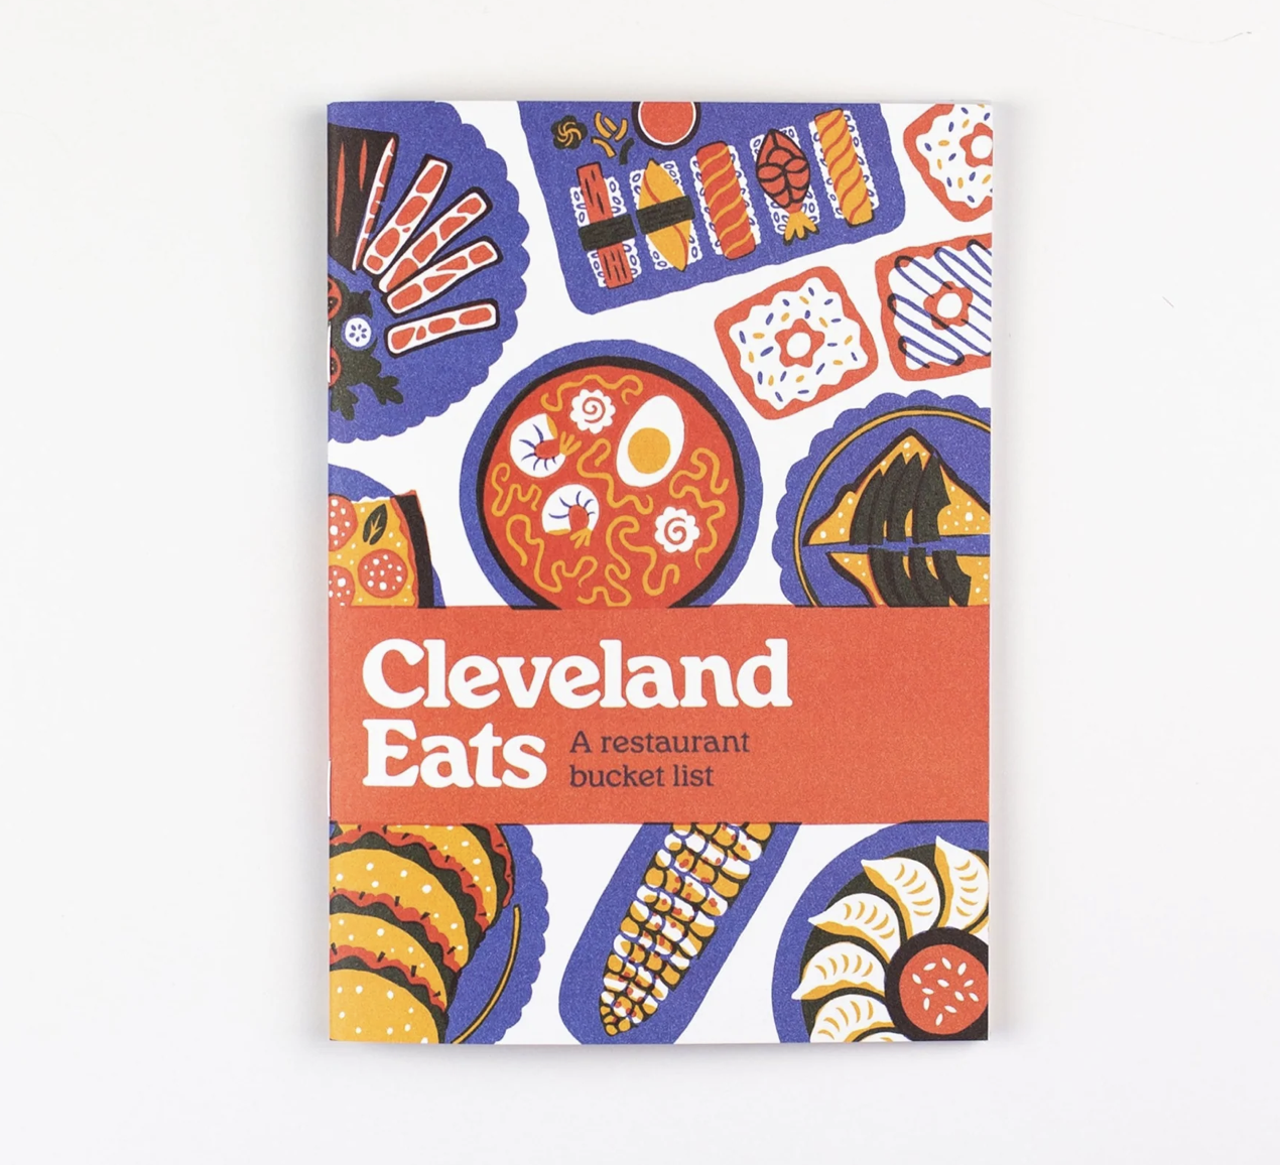 Cleveland Eats: A Restaurant Bucket List
This book provides a list of the best restaurants Cleveland has to offer over a multitude of different cuisines. There's also an introduction for each cuisine section that discusses the history of that specific food in the city, great info for all the foodies in town.